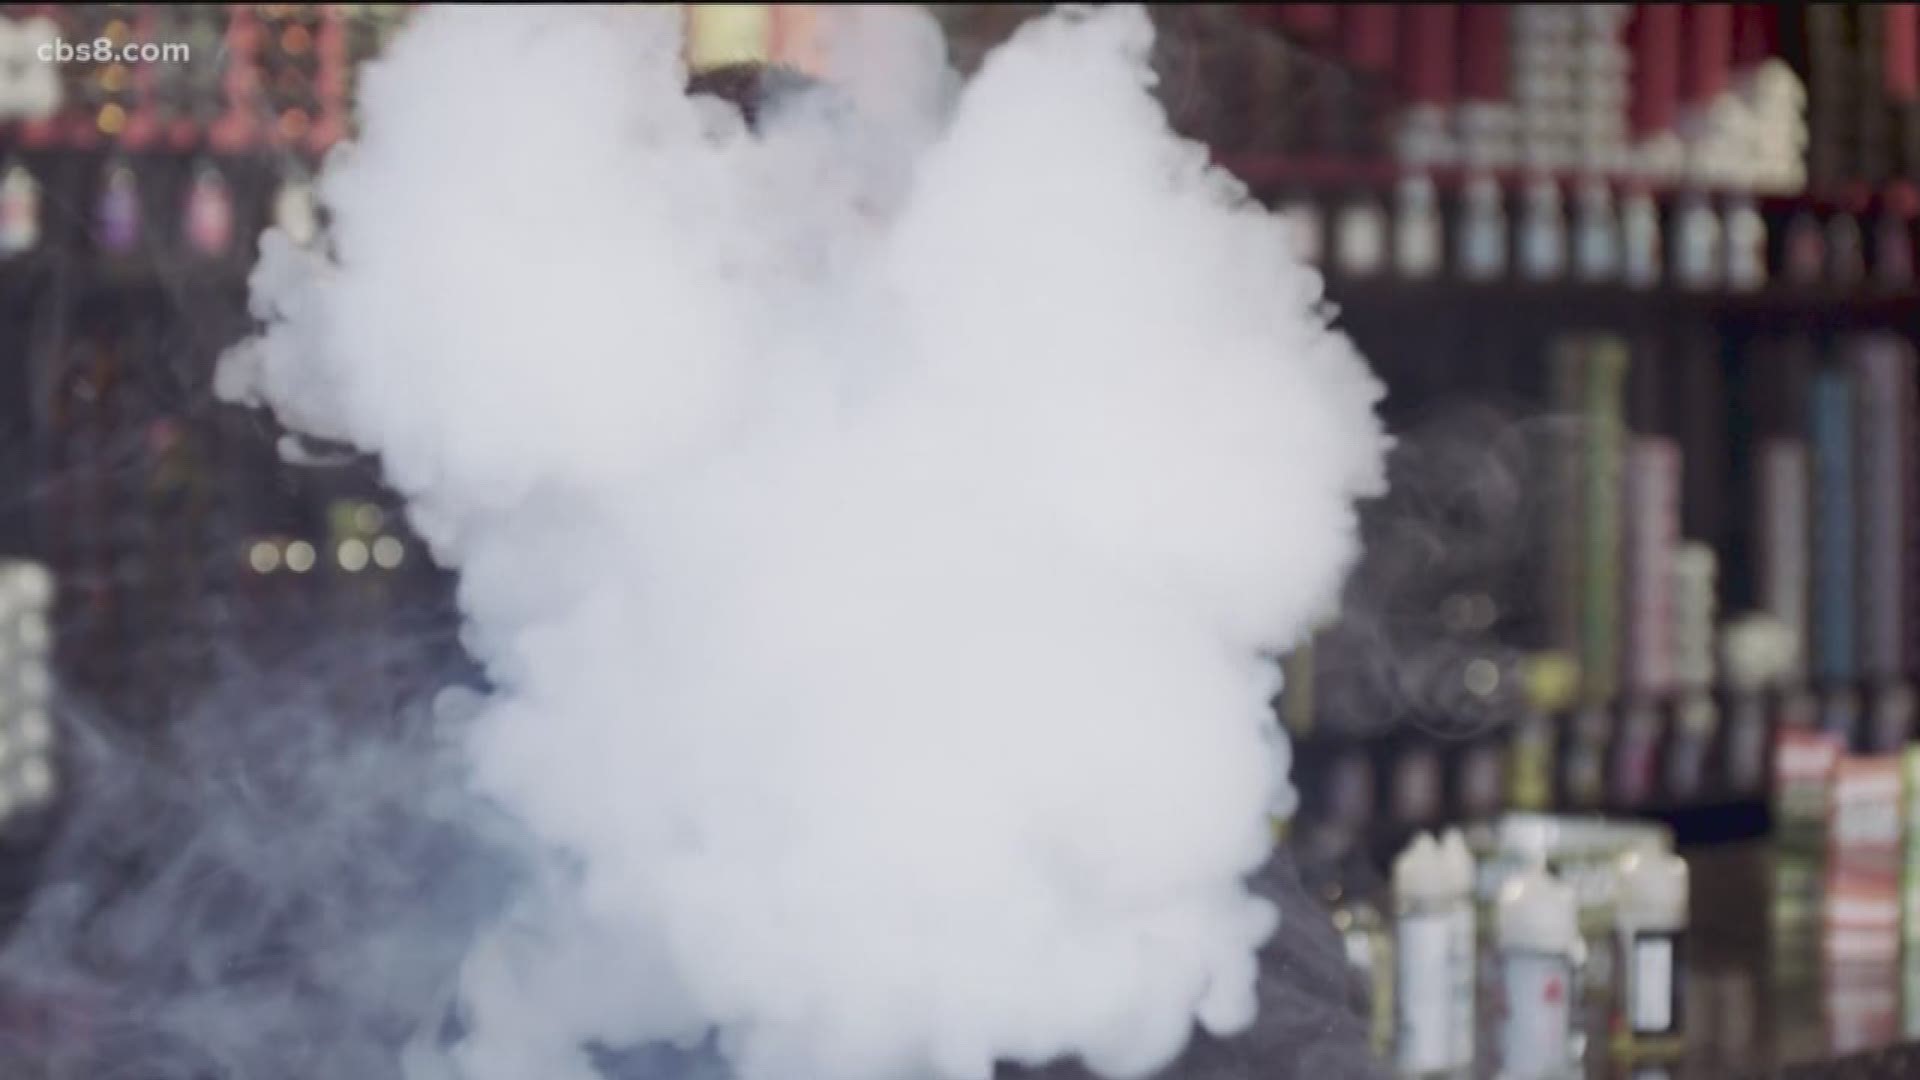 School health officials worry that vapes are changing kids' brains.